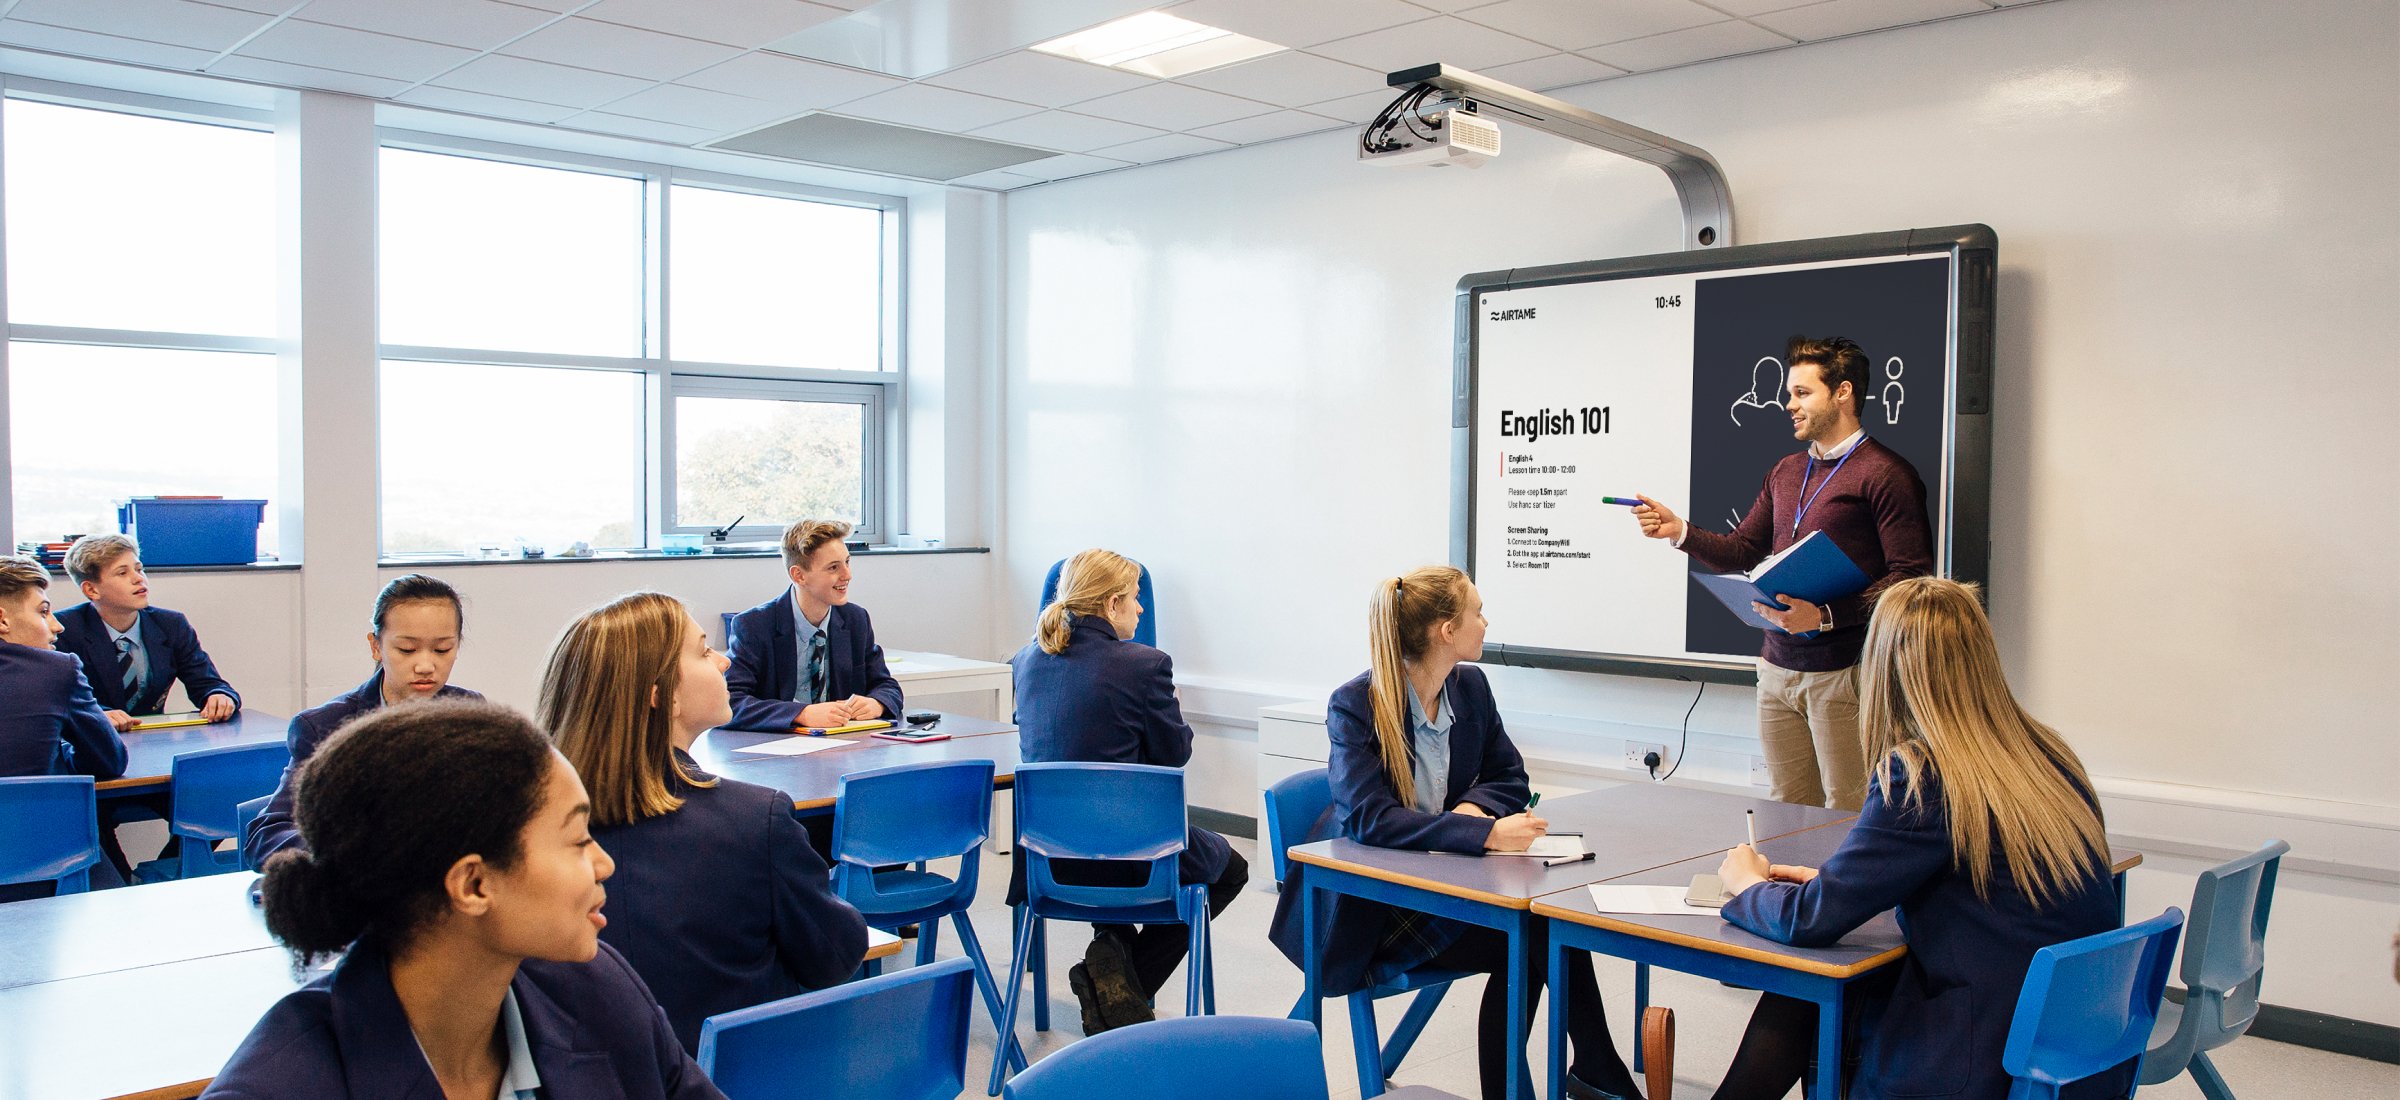 How digital signage with Airtame can promote safety and awareness in classrooms